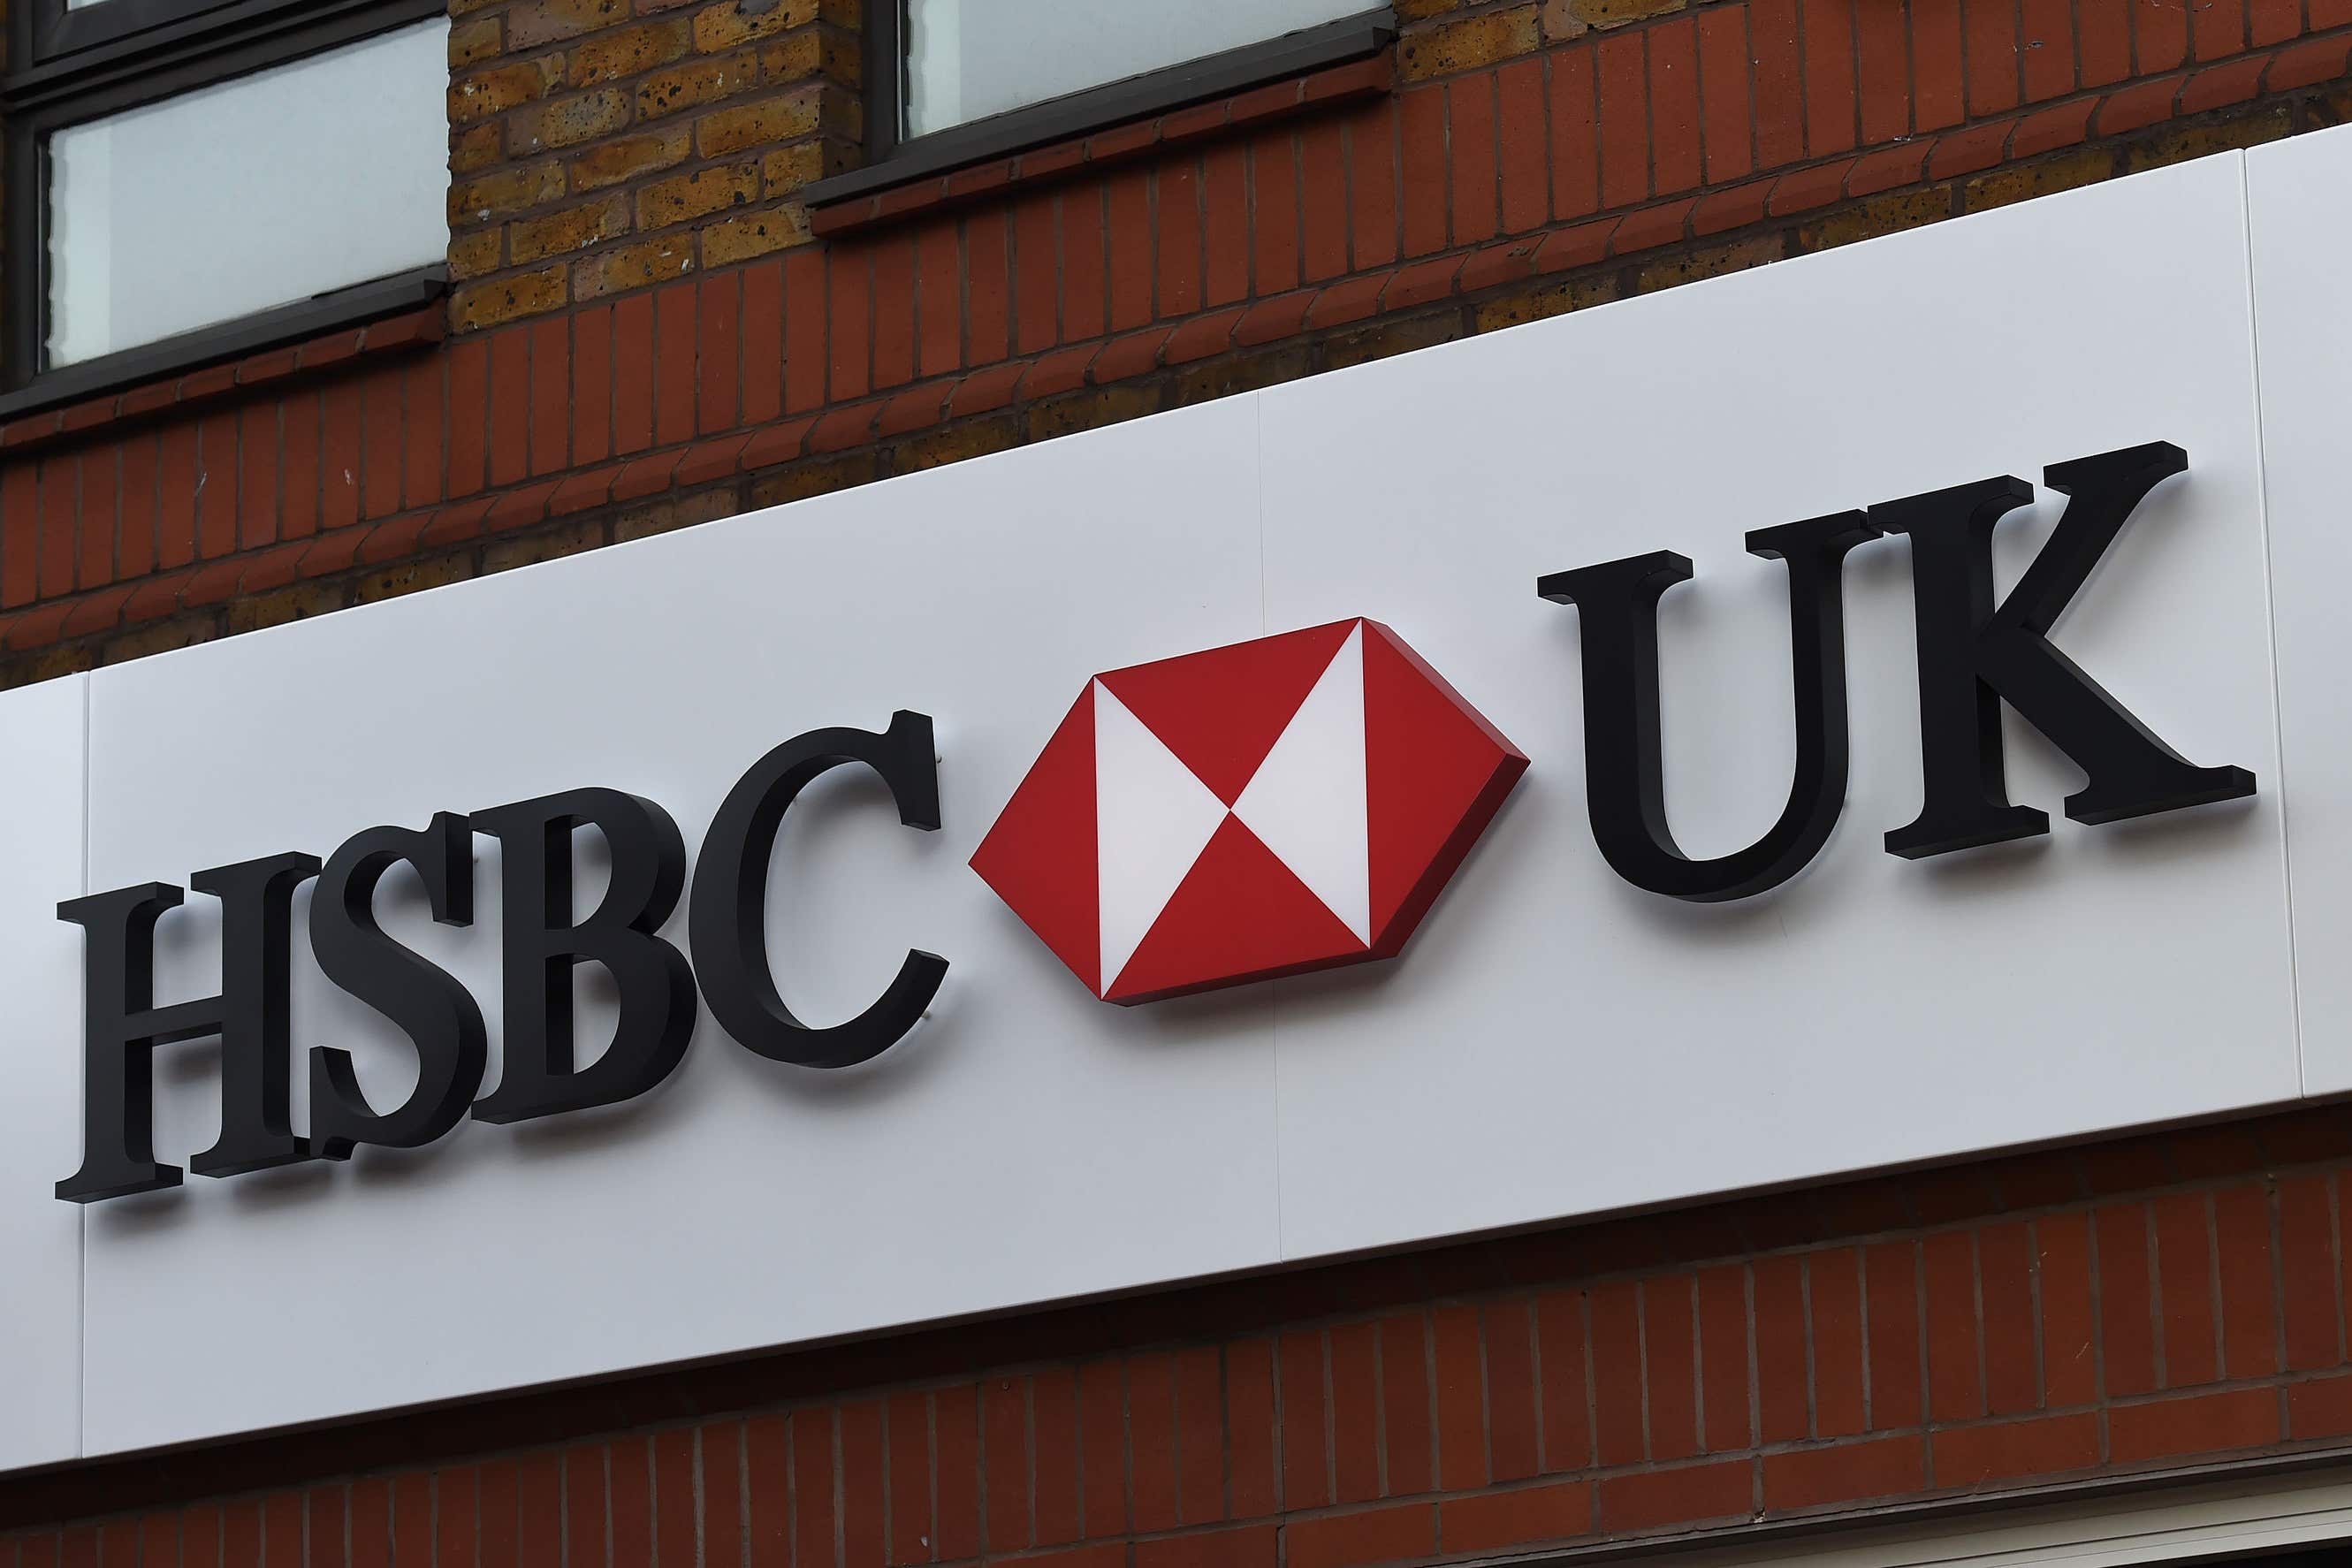 independent.co.uk - Vicky Shaw - HSBC UK reopens broker channel for mortgages